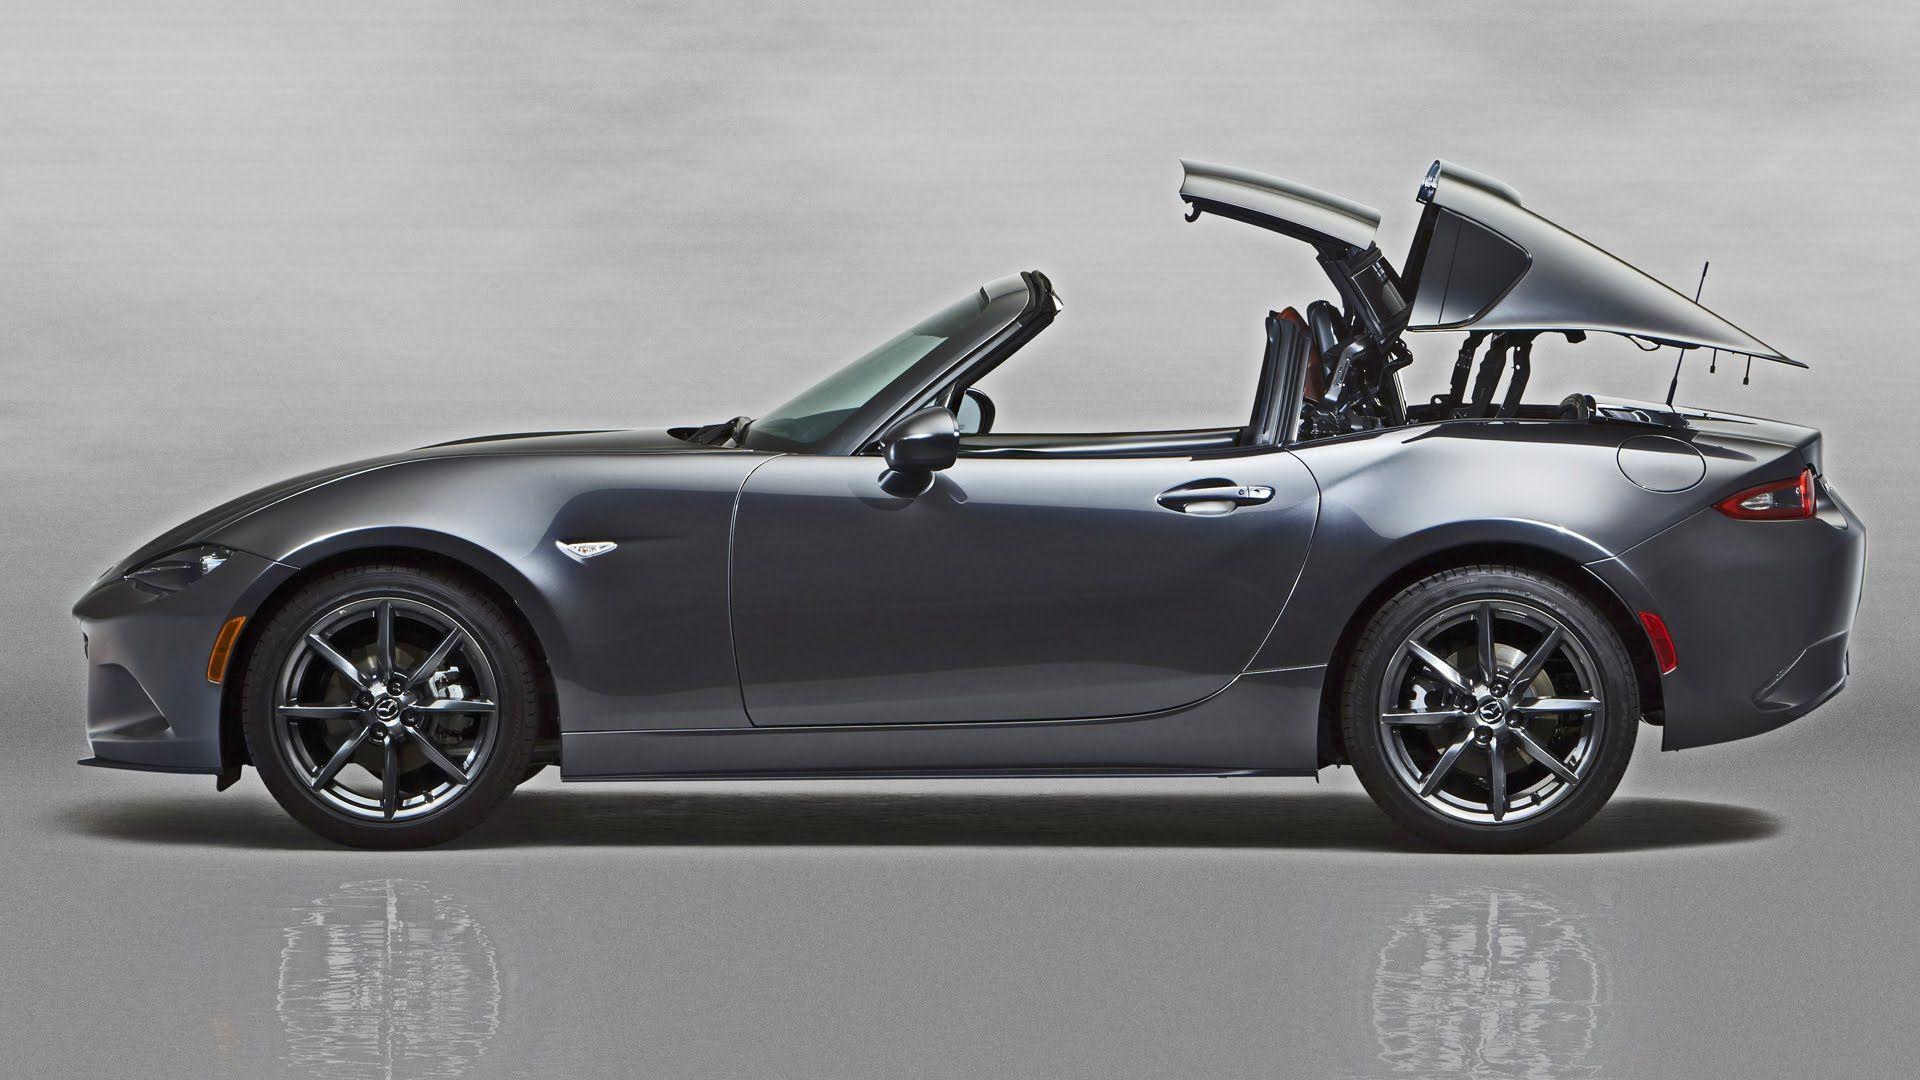 Mazda MX 5 RF (retractable Fastback). From The Land